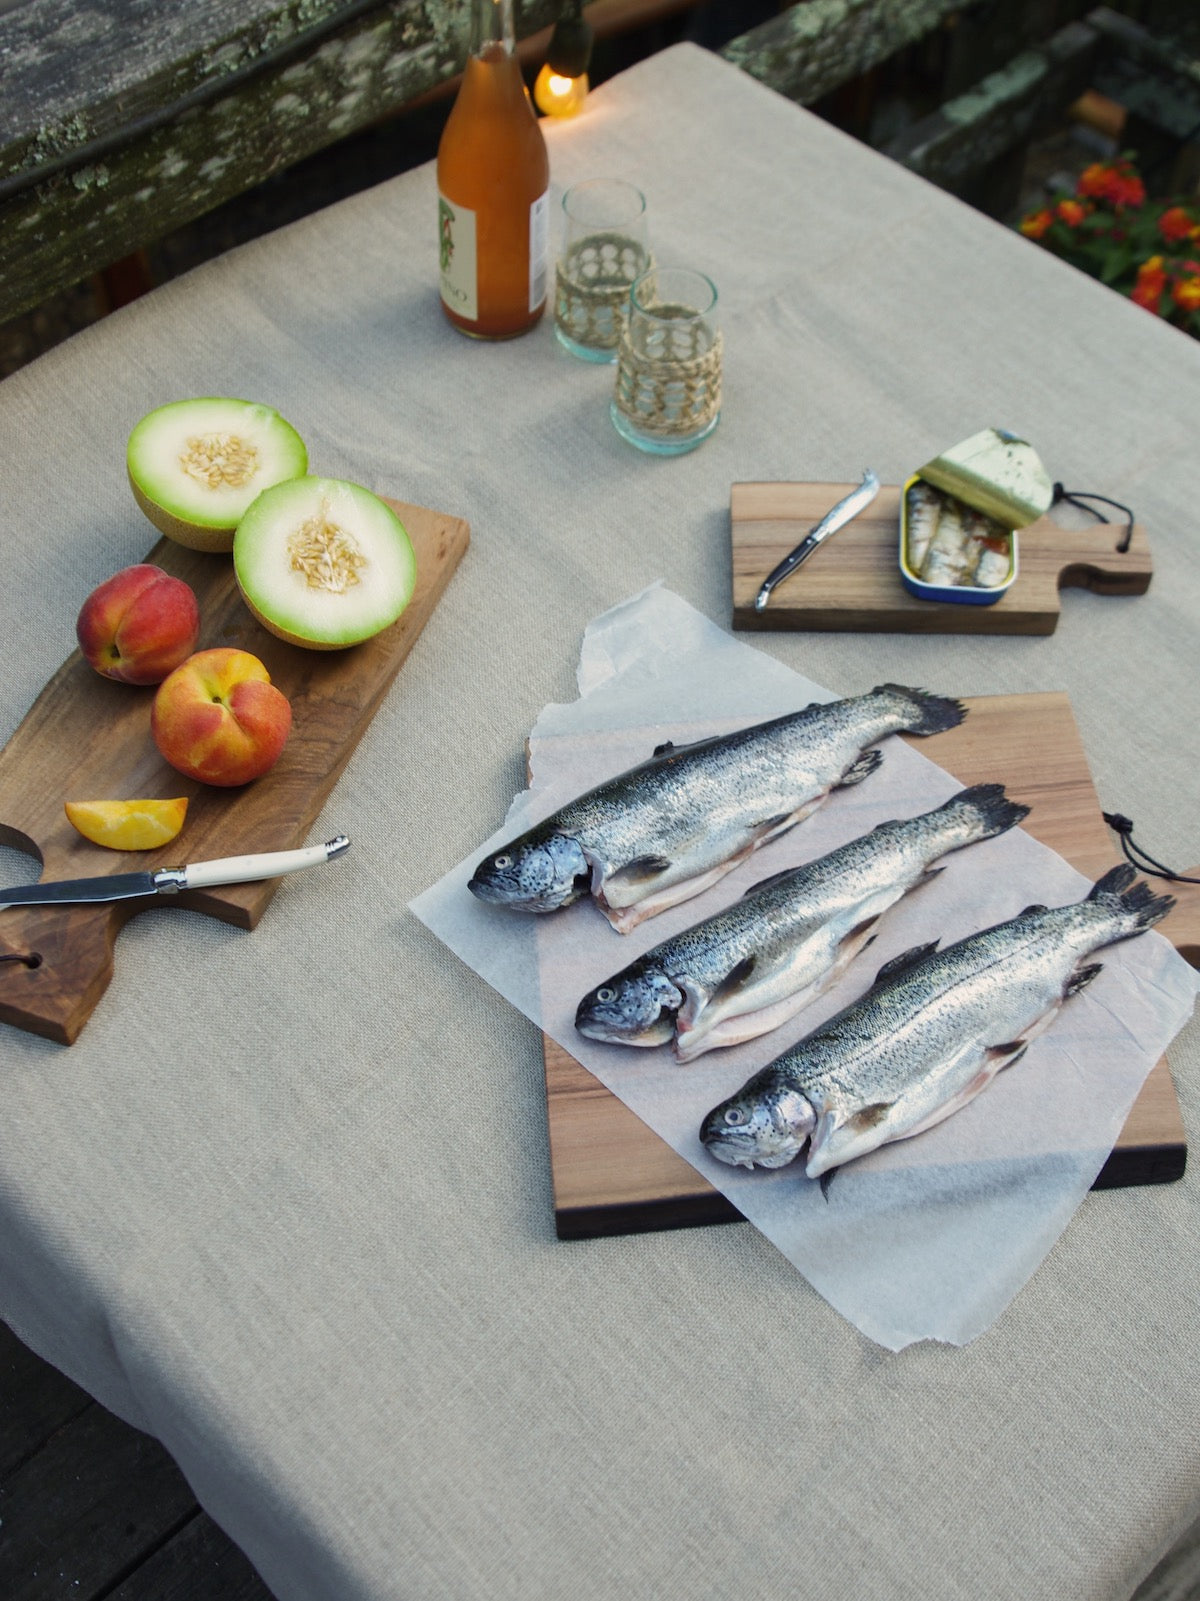 Fish on wooden cutting board. Cut fruit and knife on medium board. Sardines on small wooden cutting board.